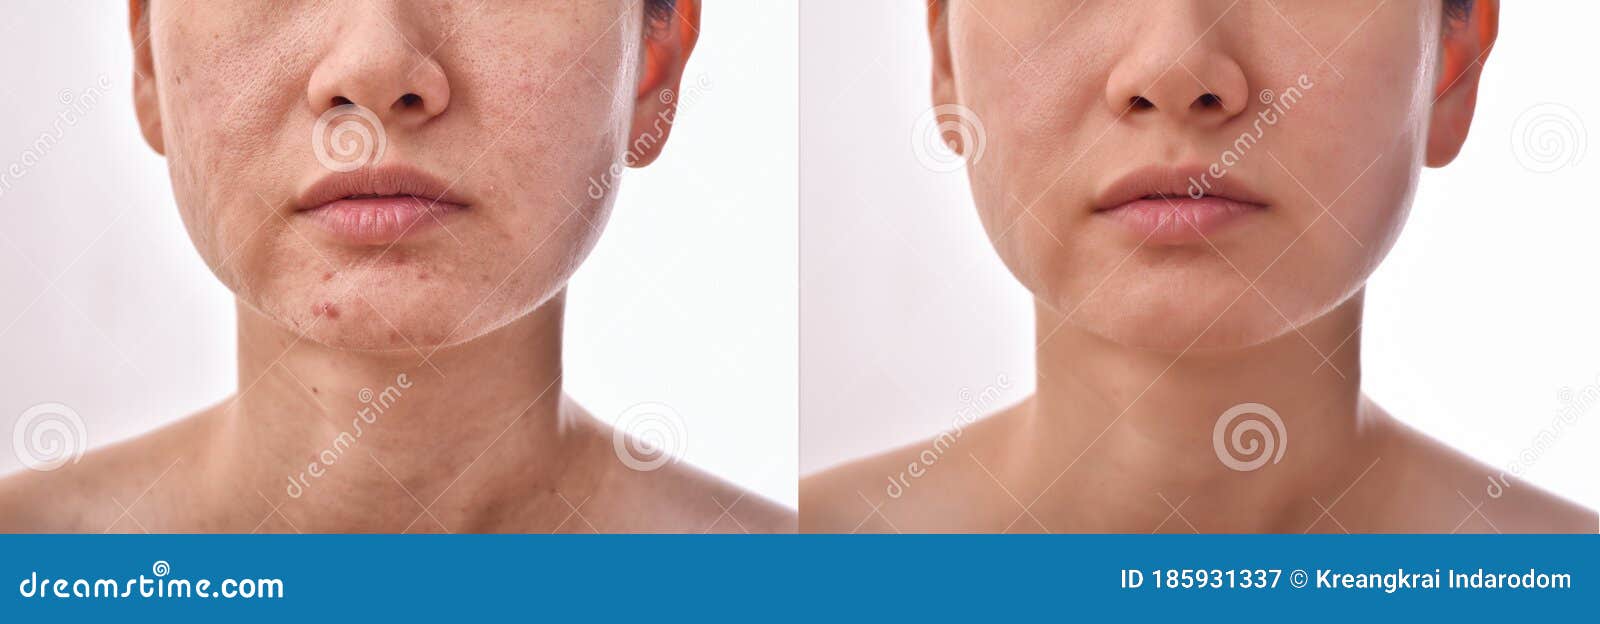 skin problems and acne scar, before and after acne facial care treatment